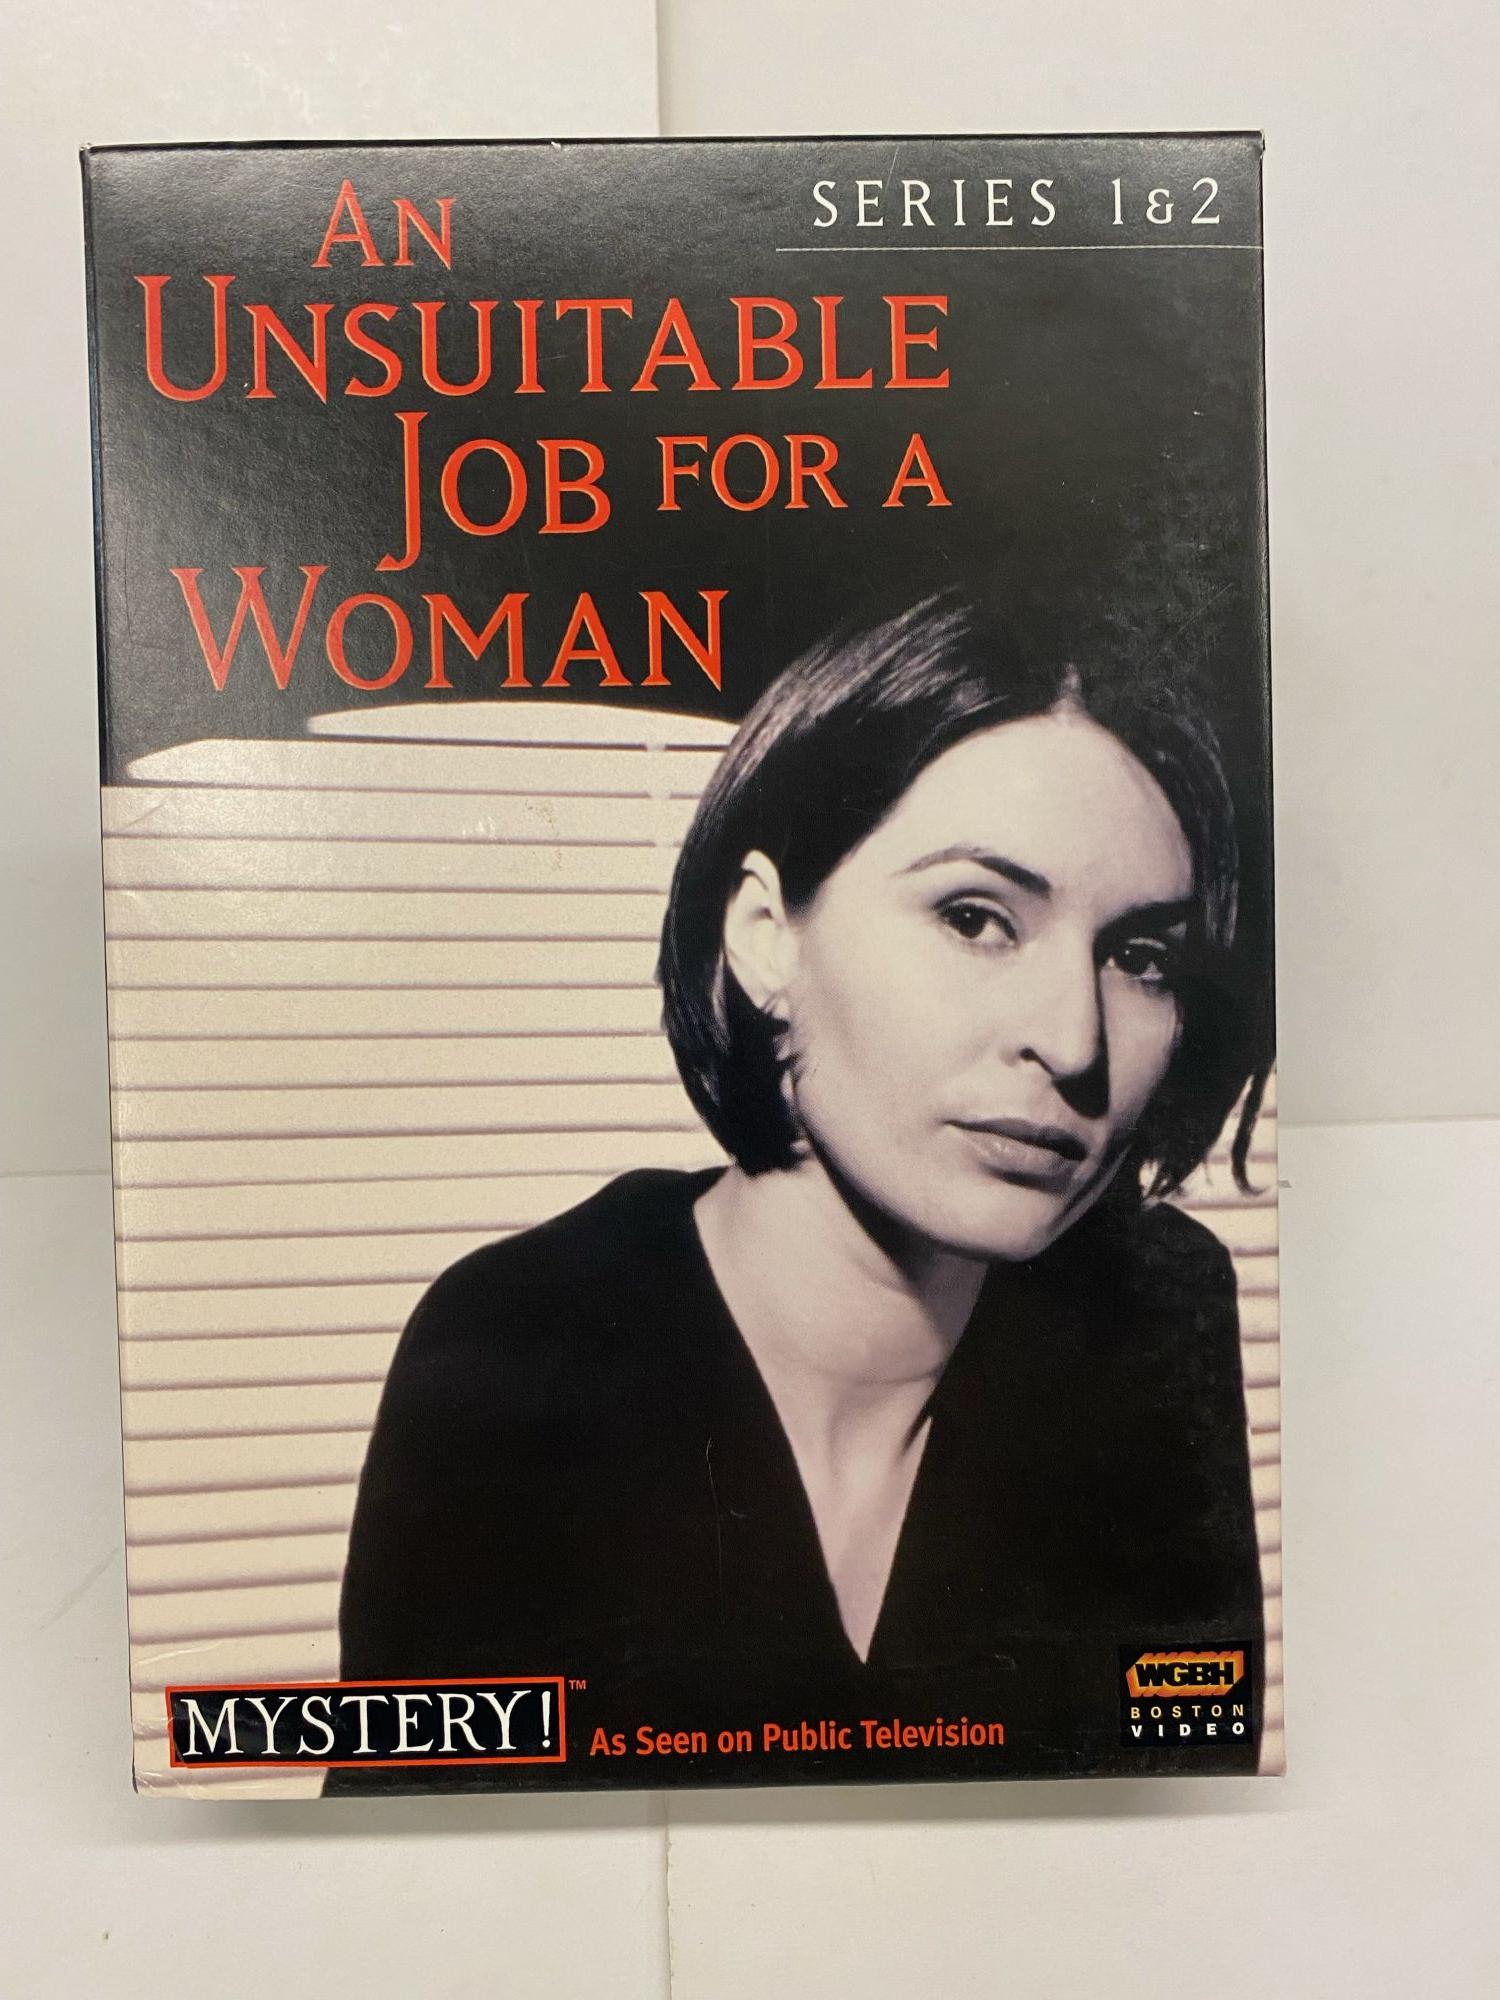 An Unsuitable Job for a Woman: Series 1 and 2 on Chamblin Bookmine